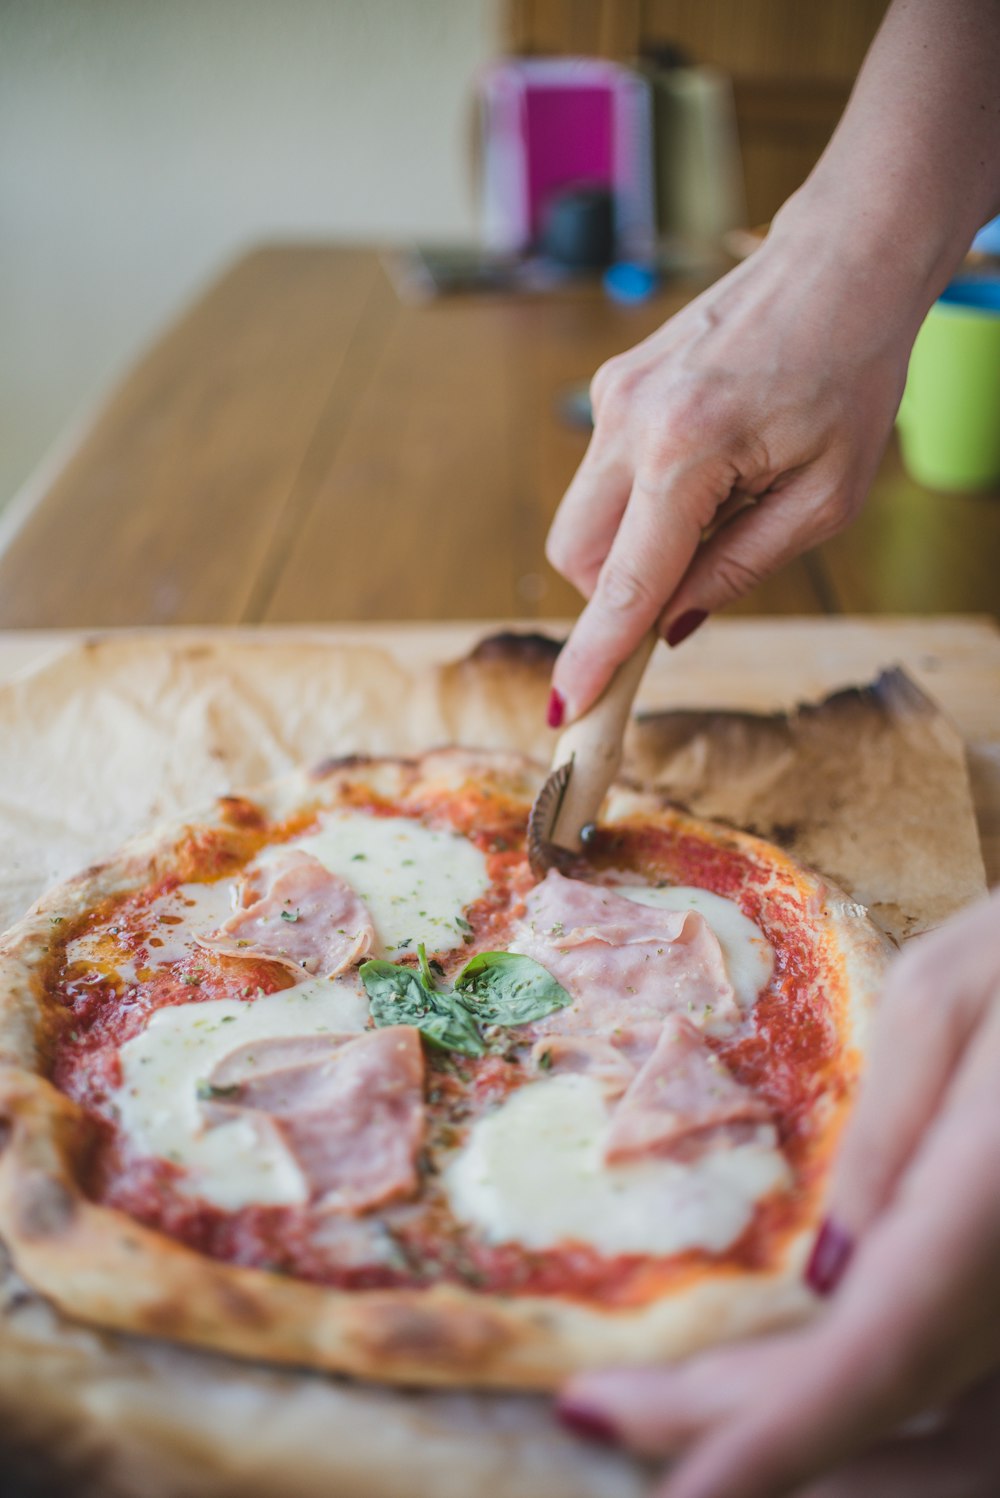 a person cutting a pizza with a pizza cutter